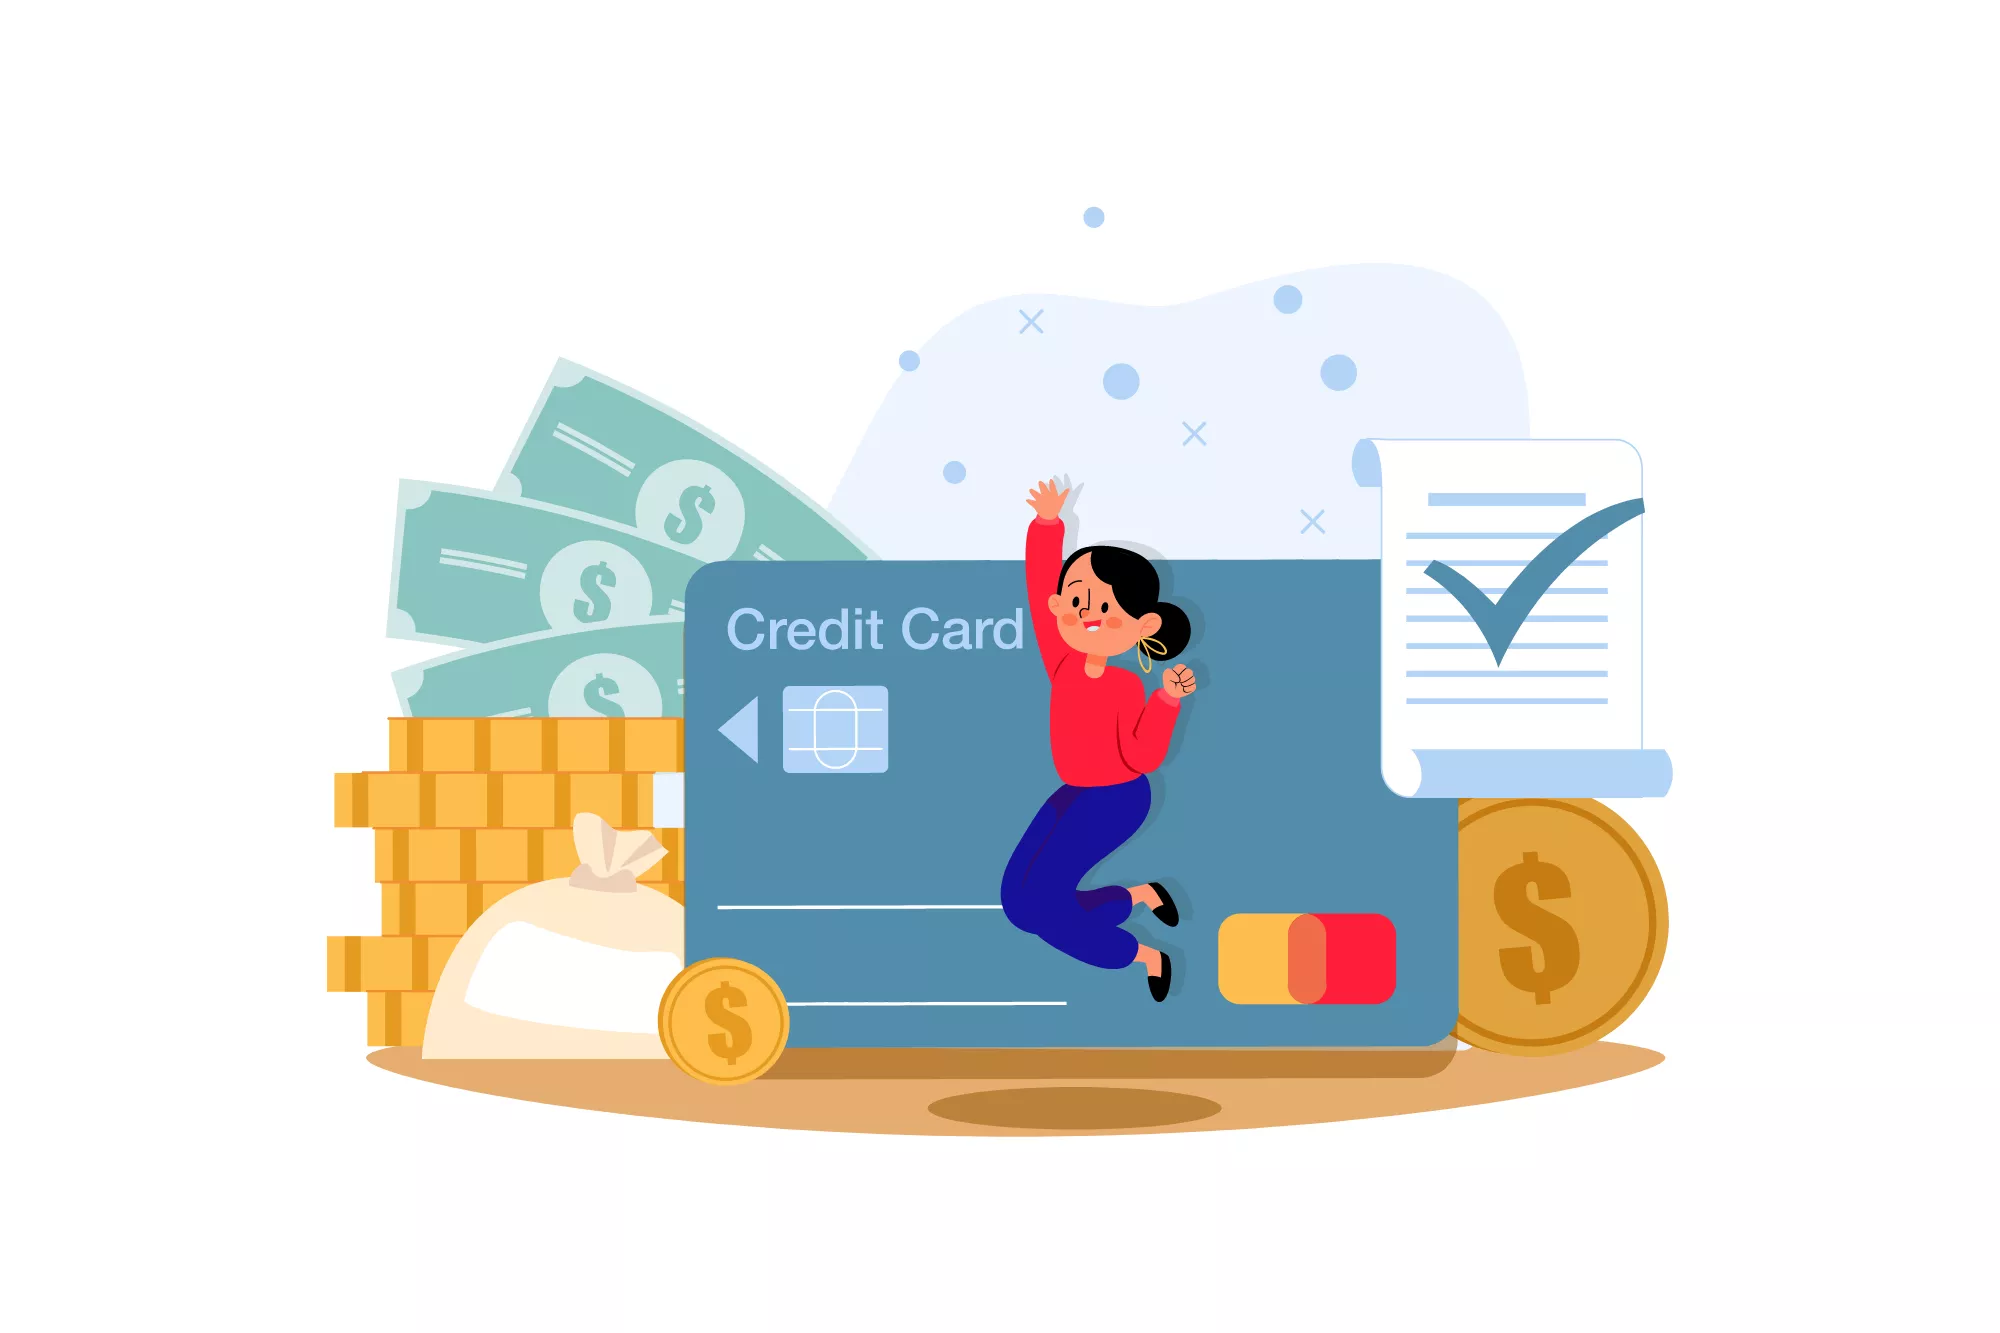 Graphic of a woman in front of a credit card and money, jumping out of excitement after checking her Experian credit score.